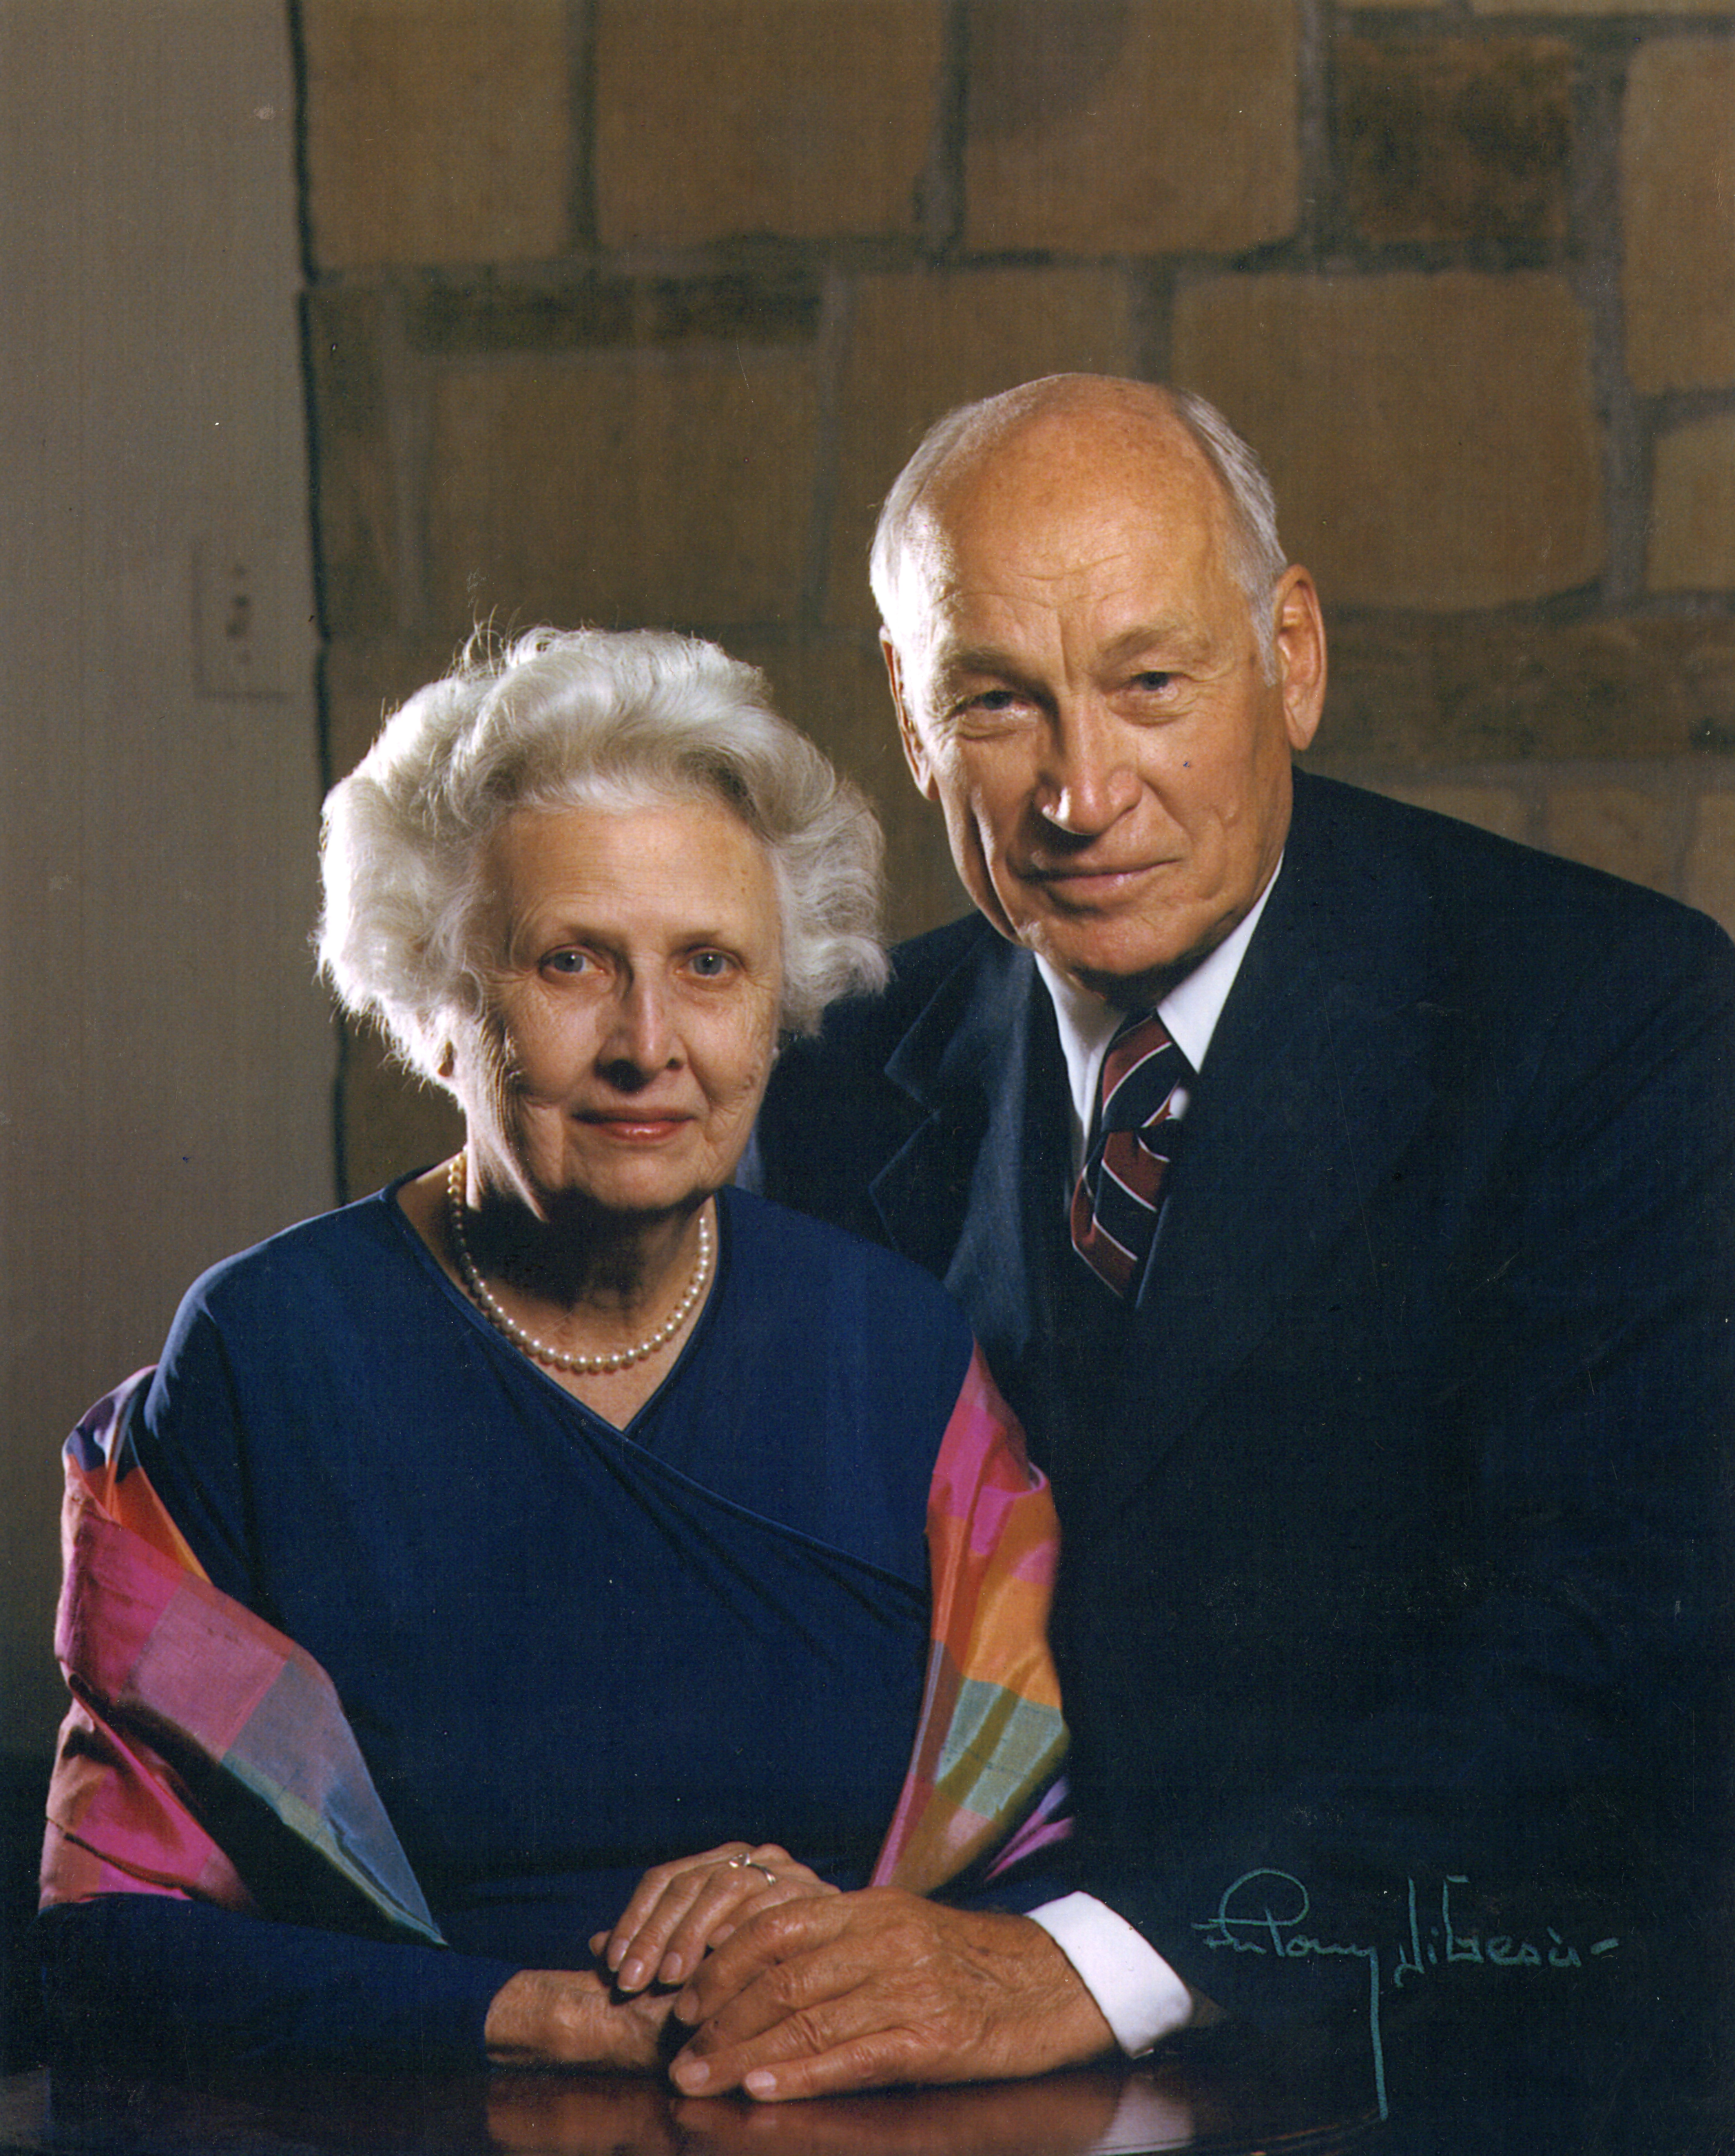 Later in life, Arnold and Mabel Beckman pose for a professional portrait.